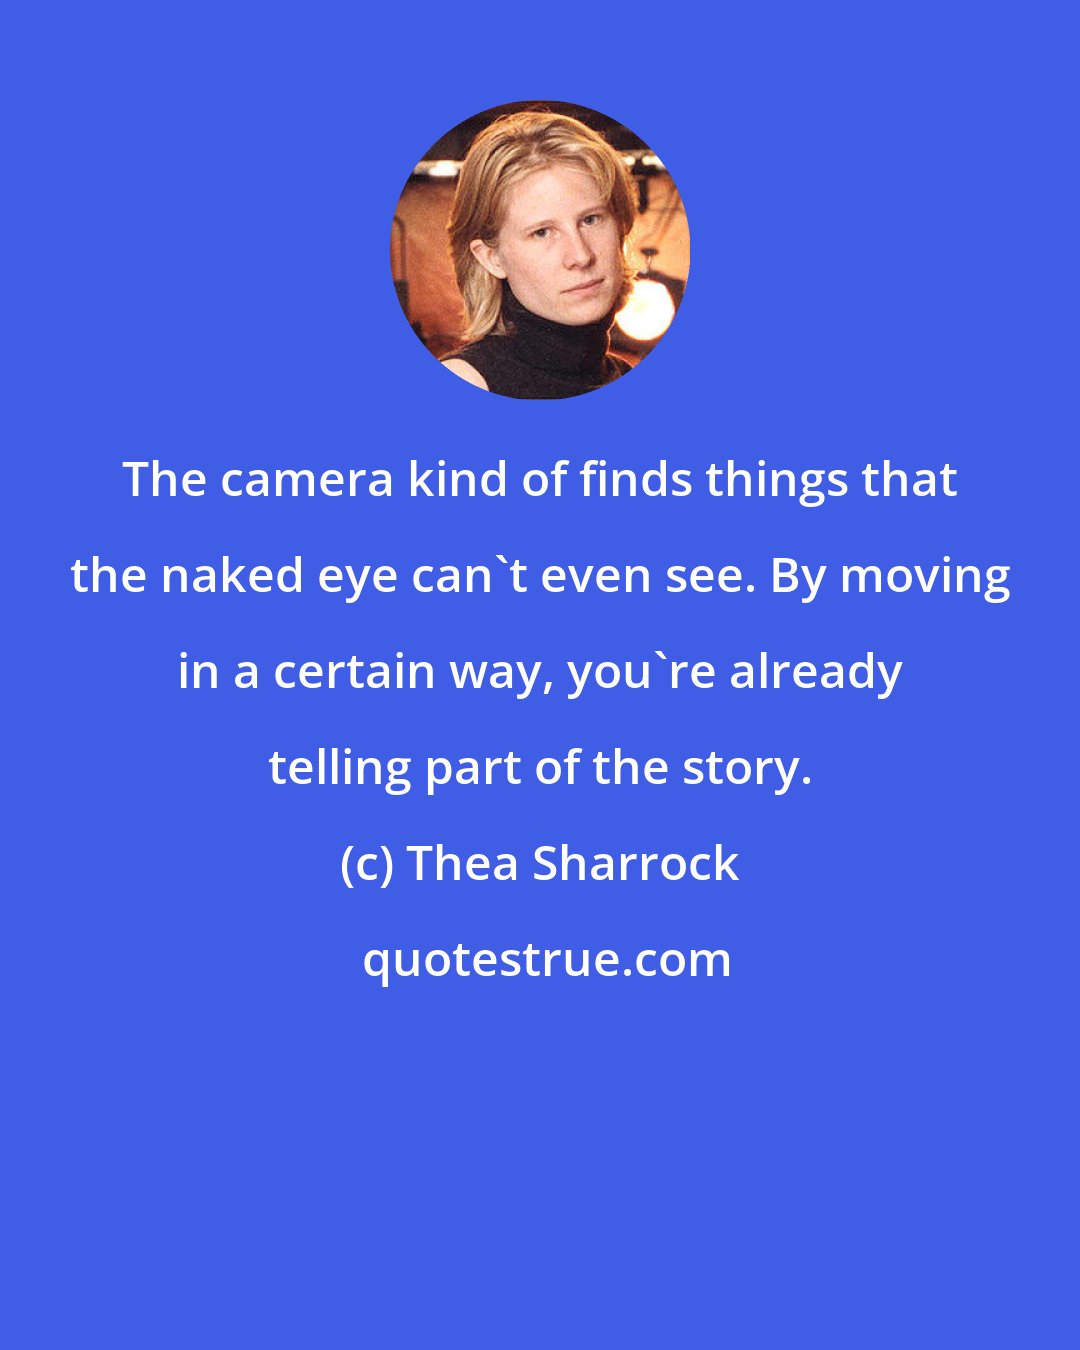 Thea Sharrock: The camera kind of finds things that the naked eye can't even see. By moving in a certain way, you're already telling part of the story.